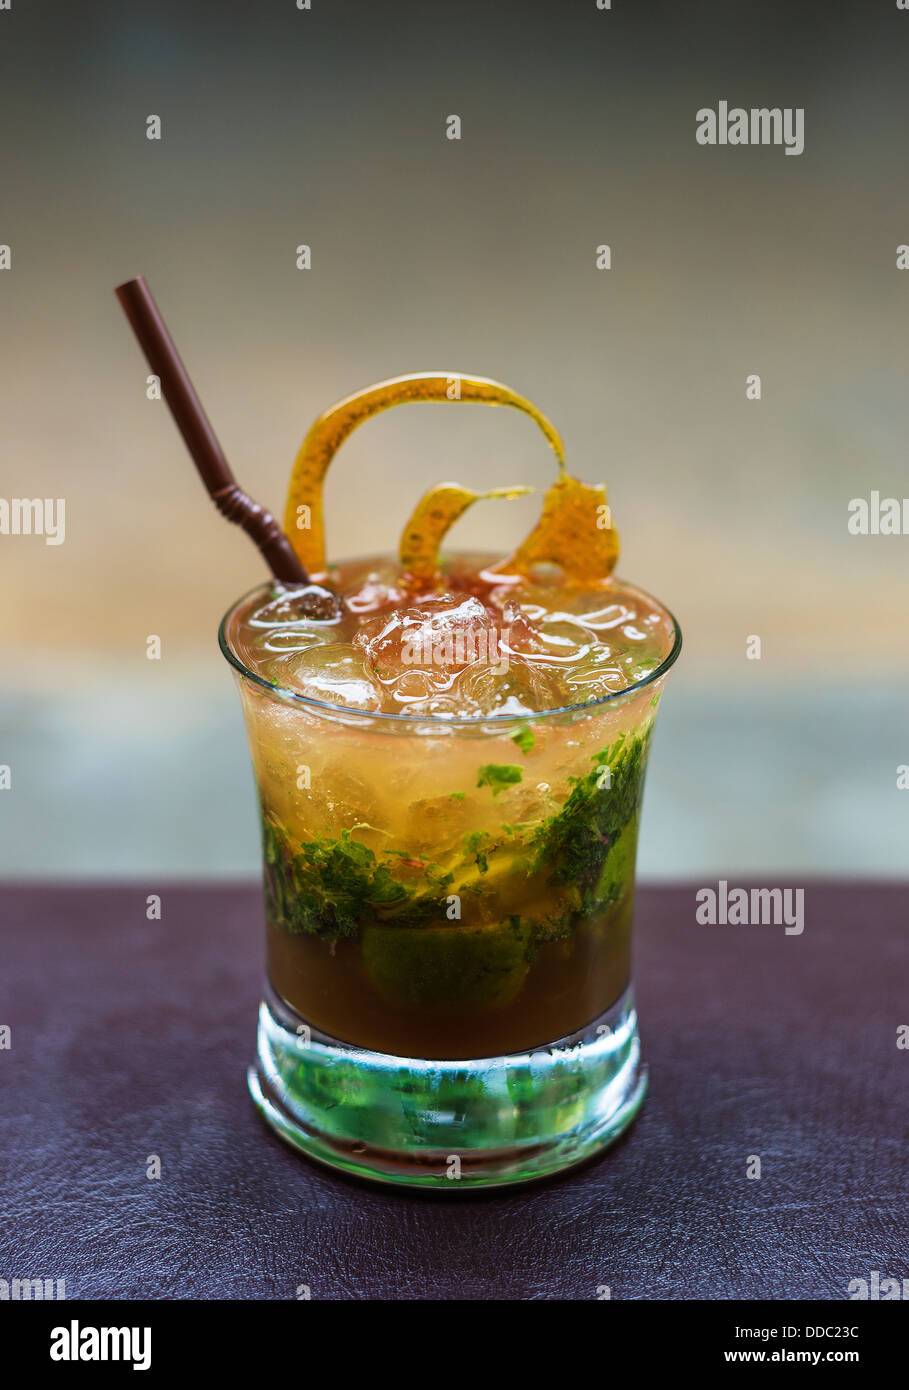 mojito rum alcoholic cocktail drink Stock Photo